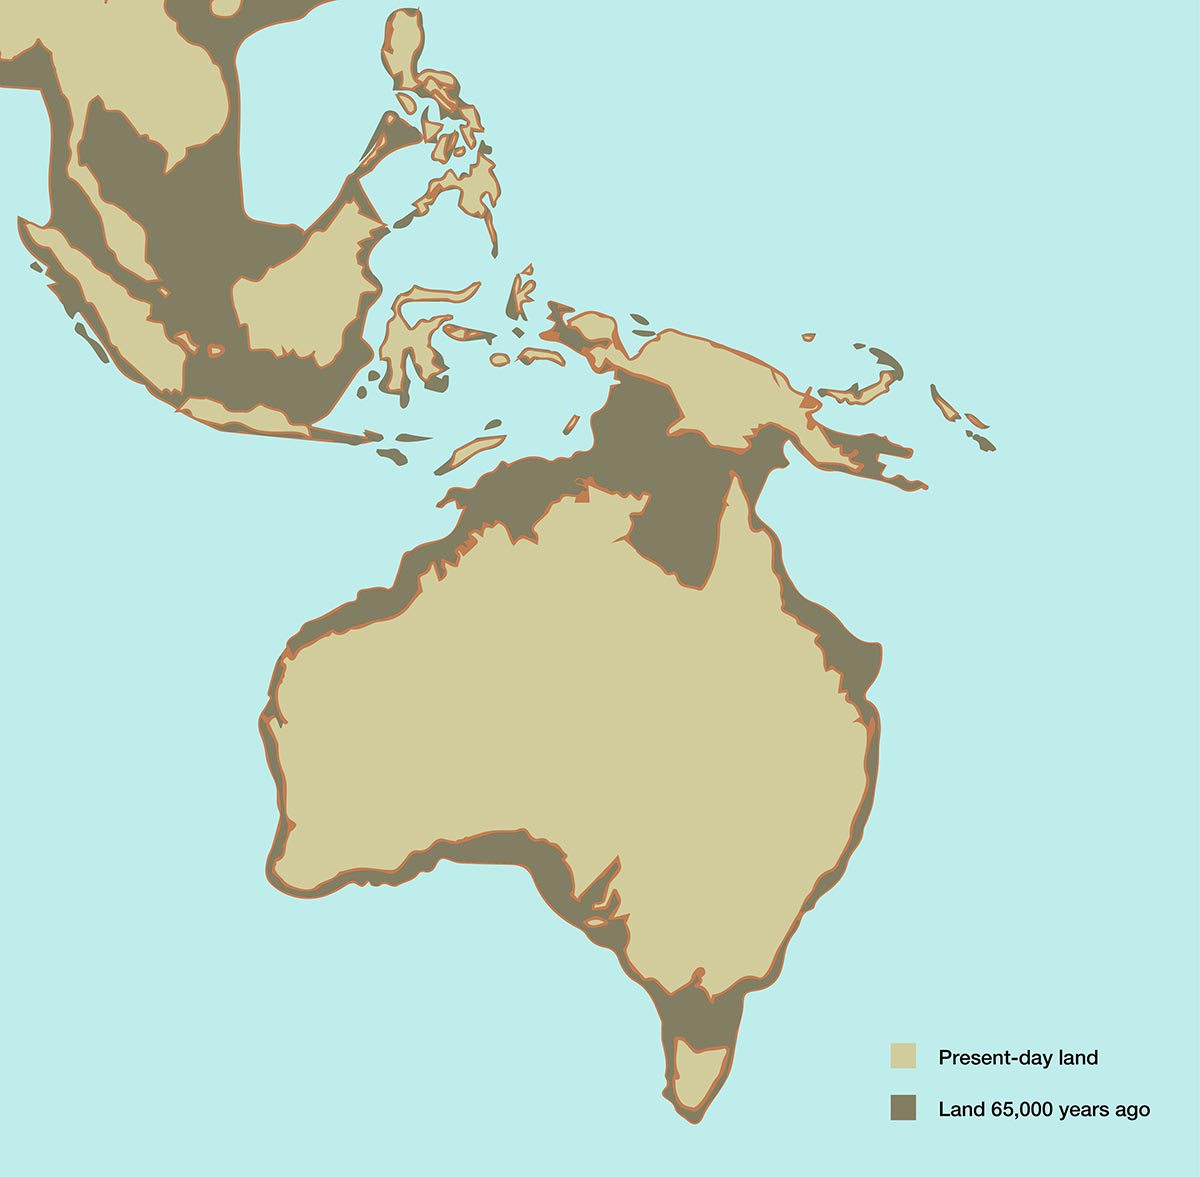 Map comparing the land formation of Australia and South East Asia in current and ancient times.